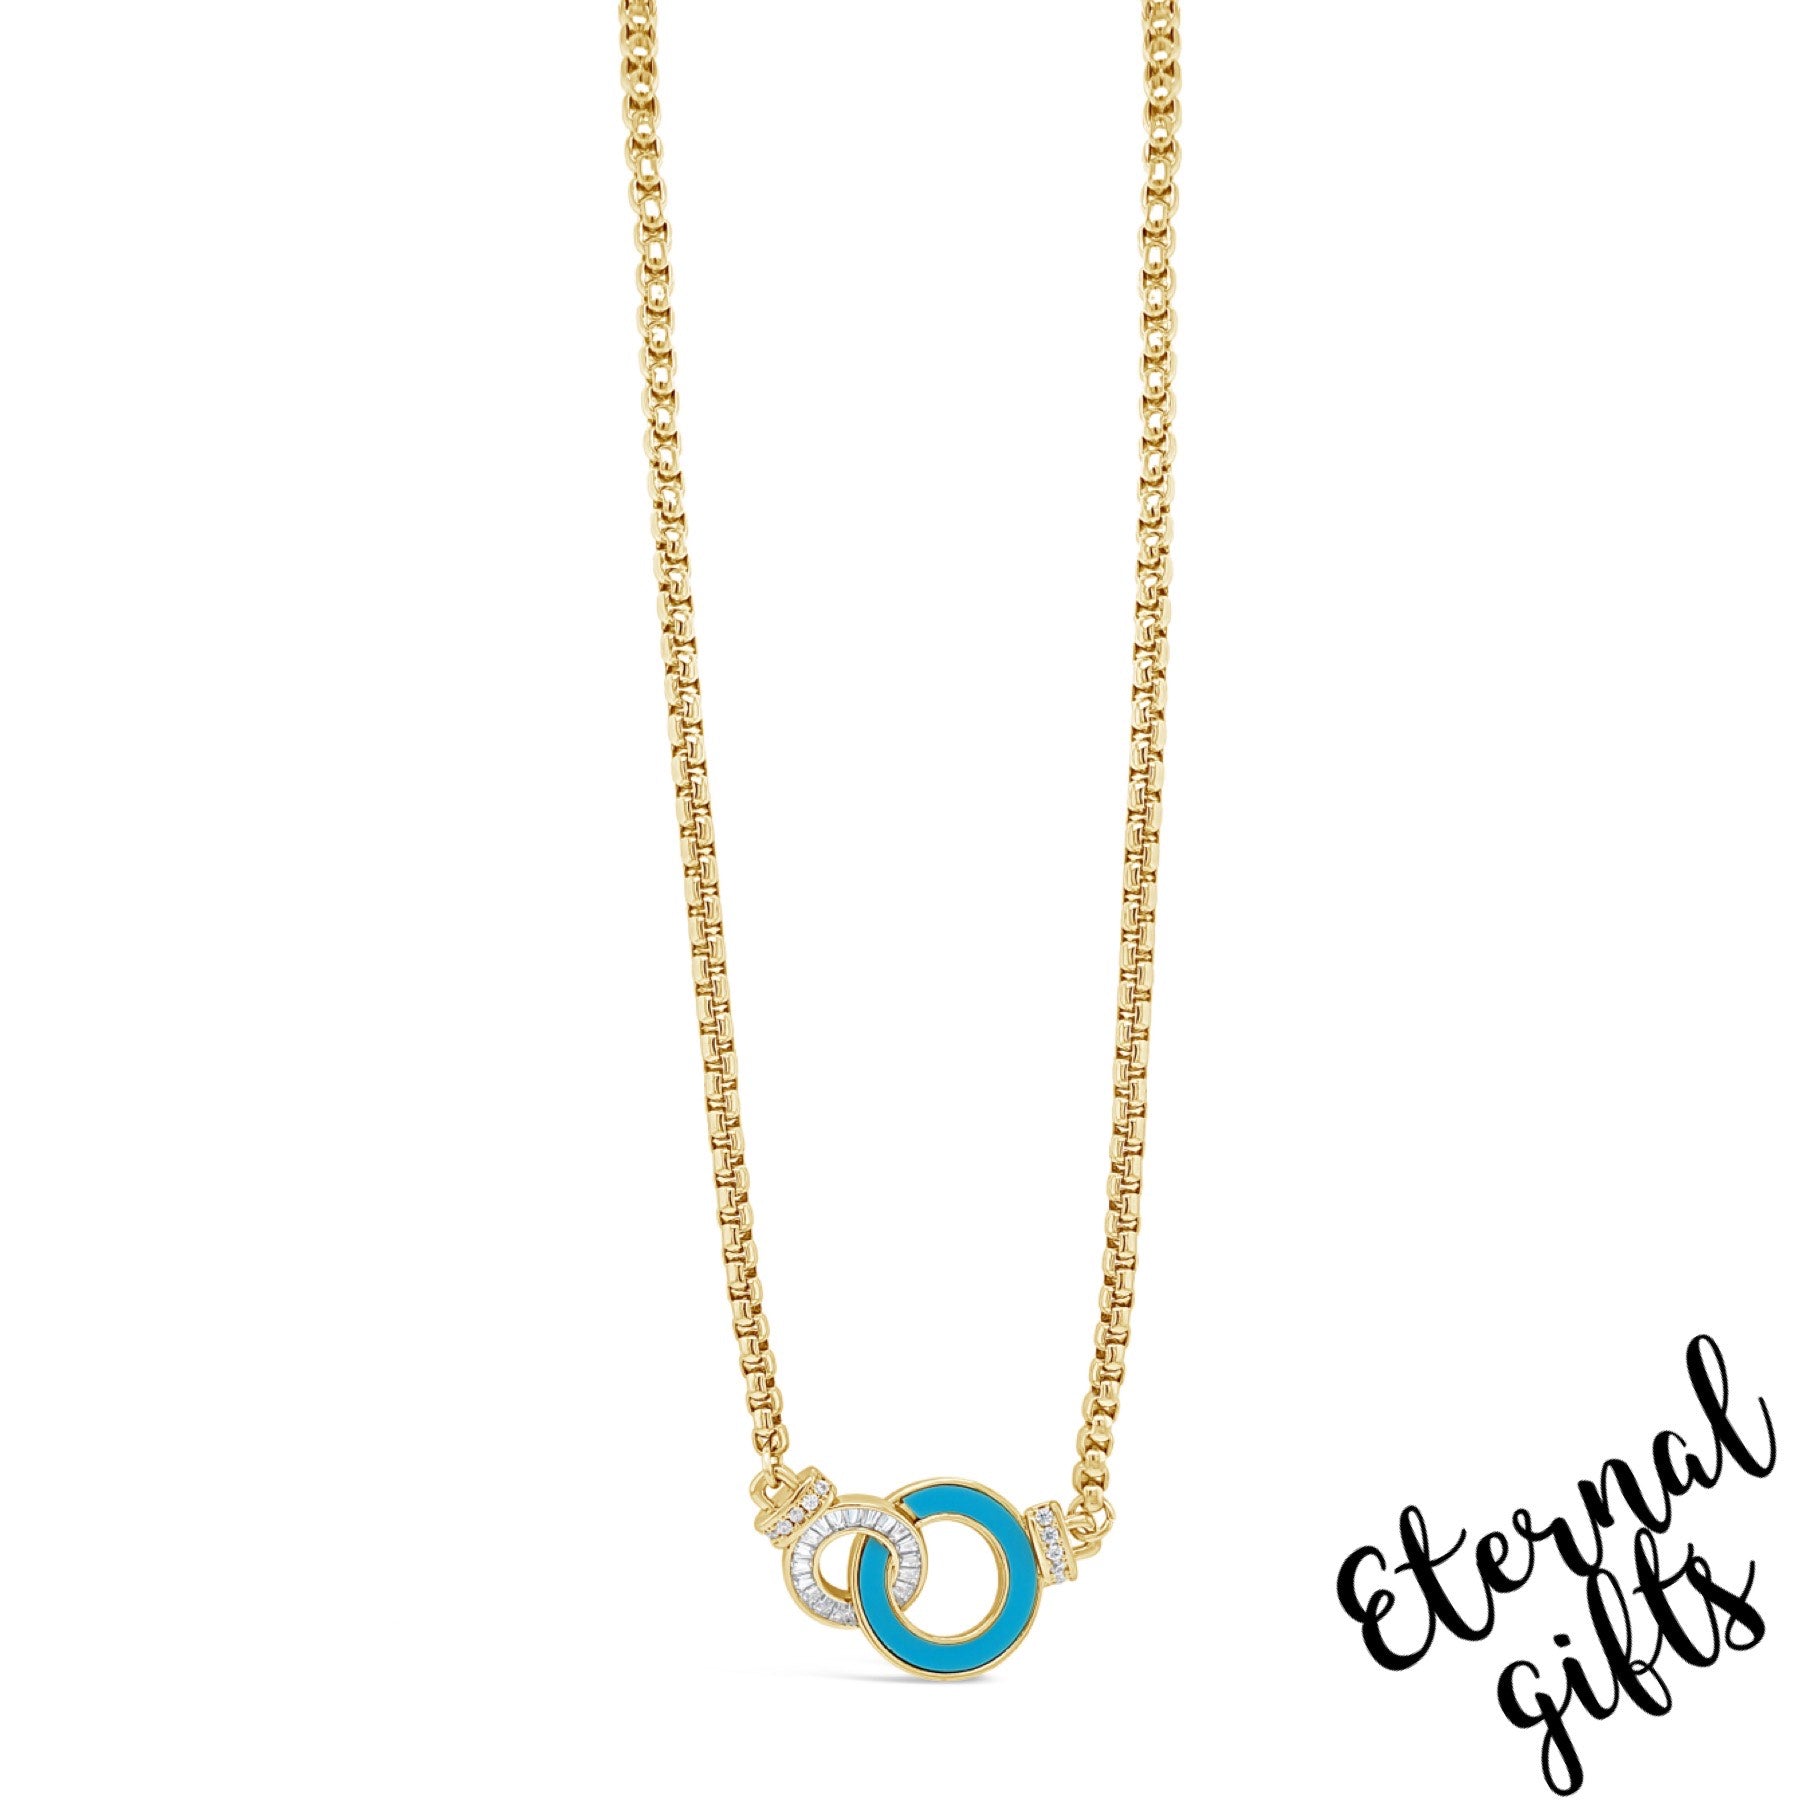 Interconnecting Necklace in Turquoise & Gold by Absolute Jewellery